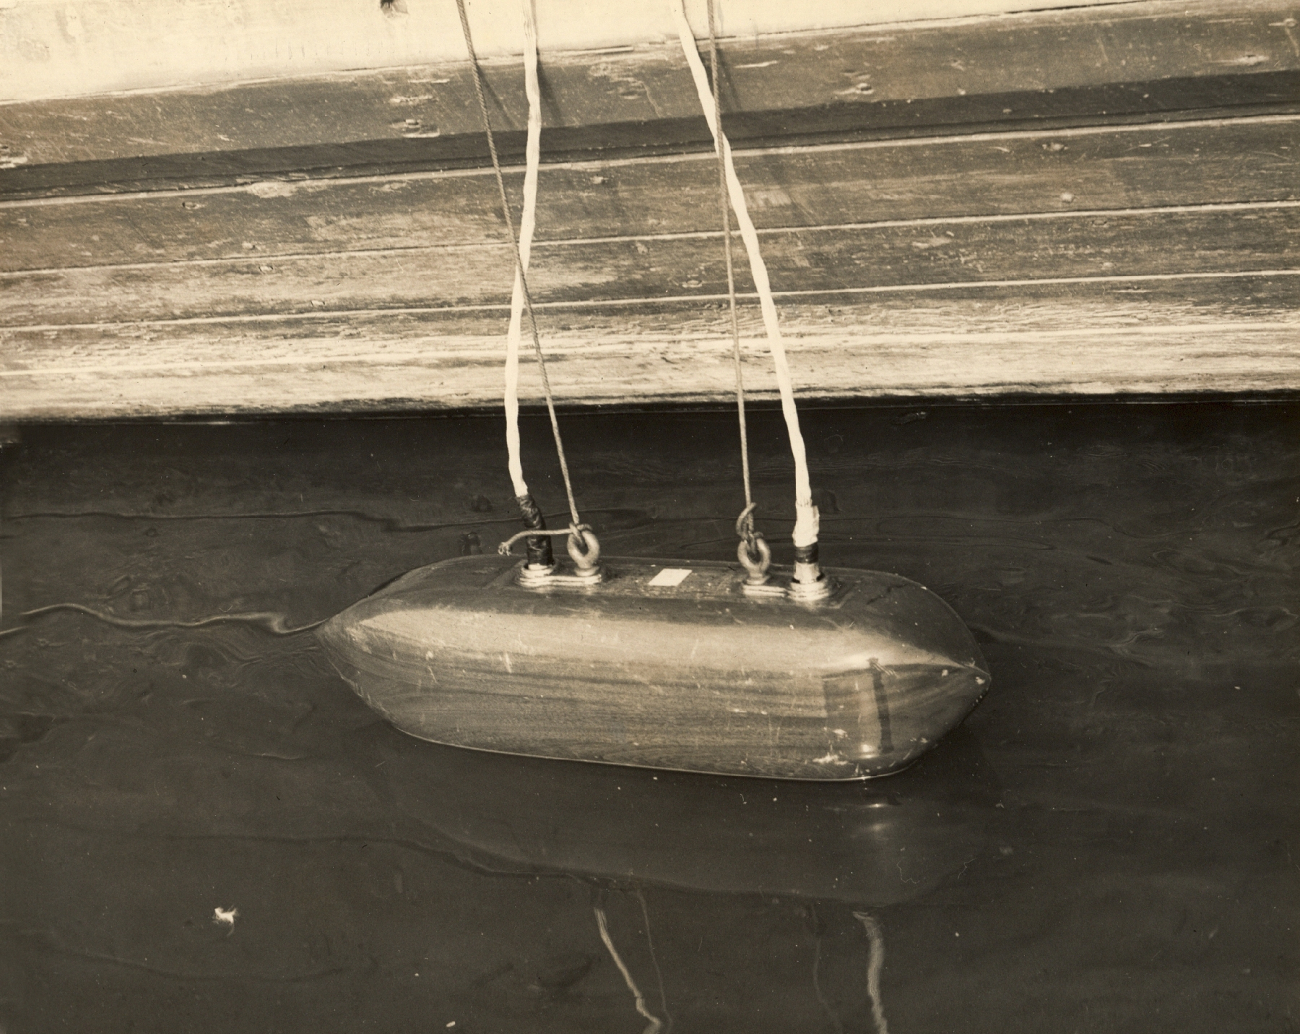 Portable fathometer transducer being lowered into water